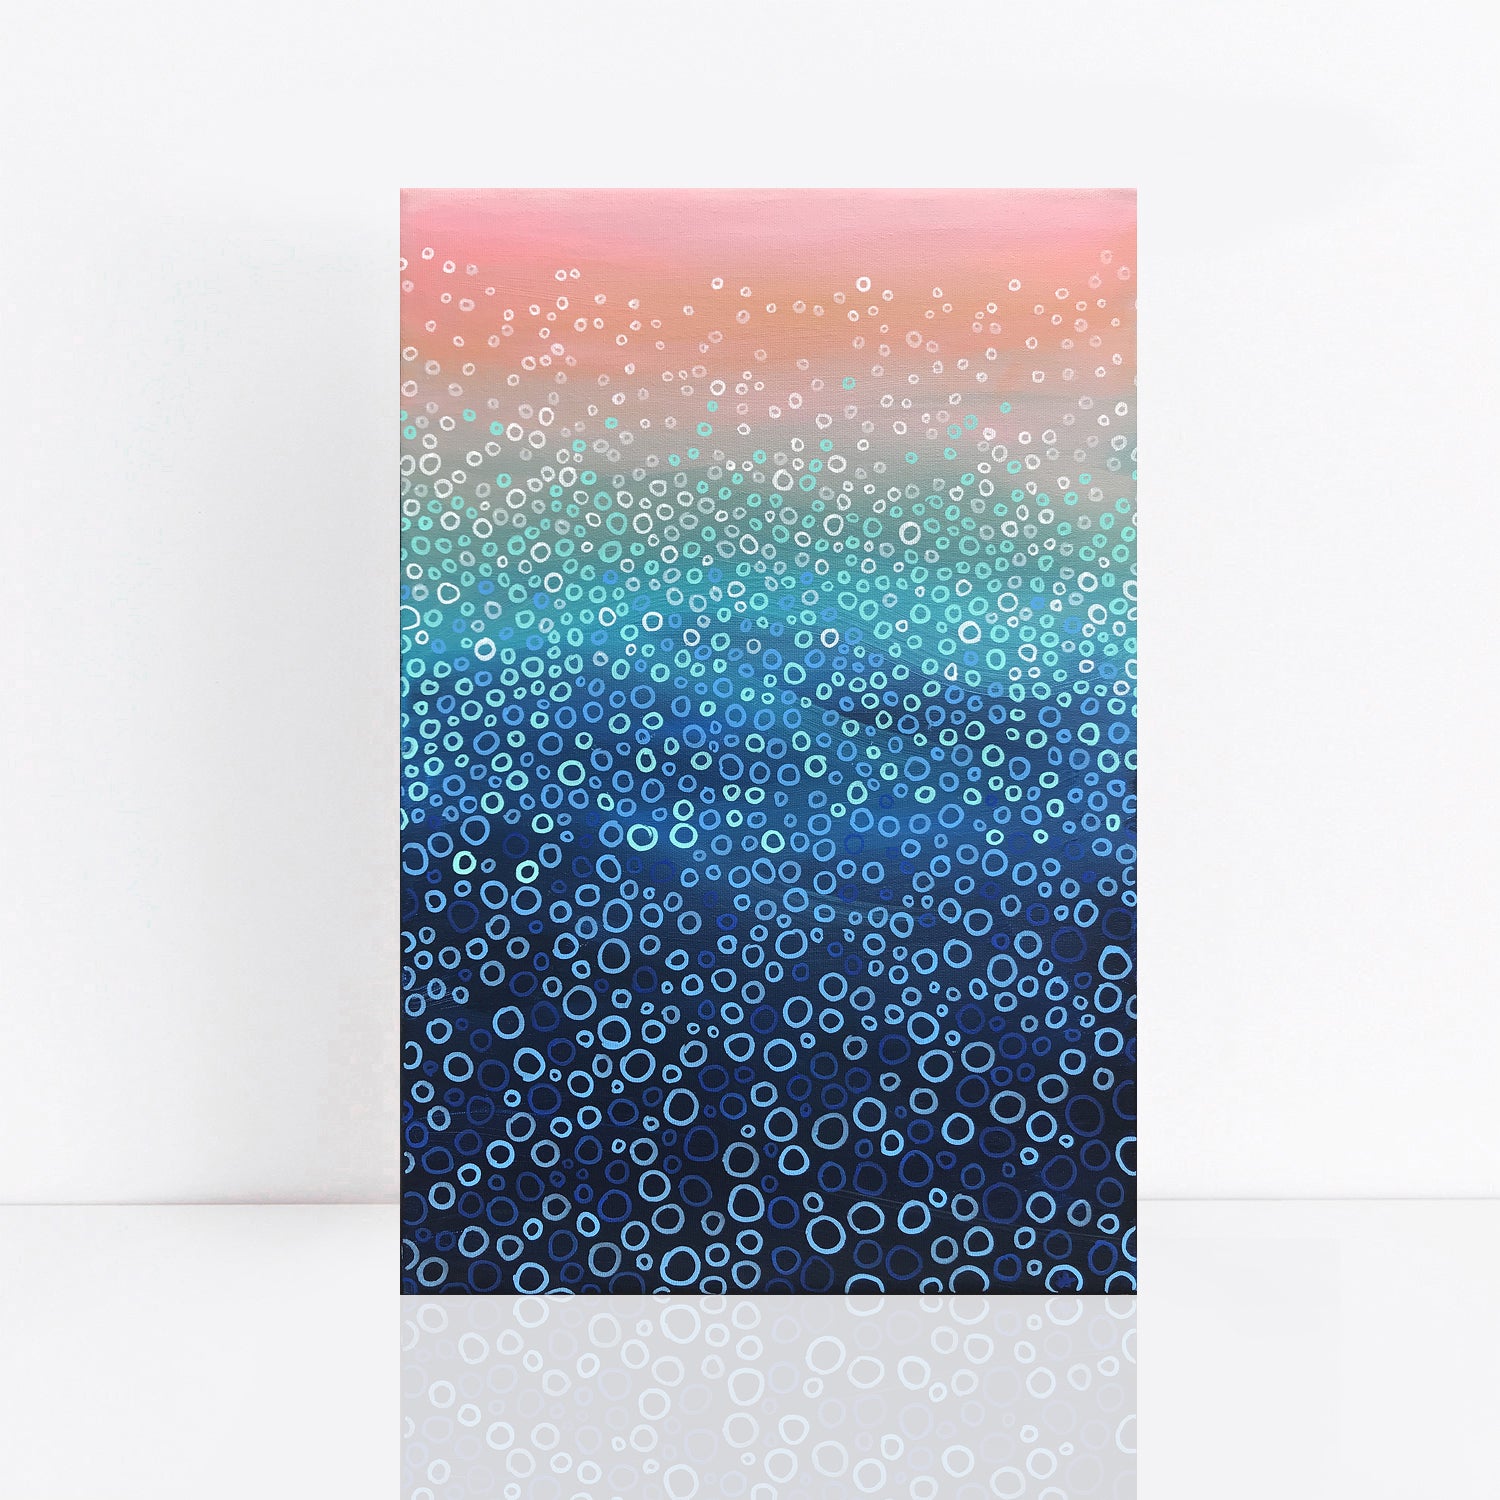 Abstract pointillism painting in shades of blue, turquoise and pink.